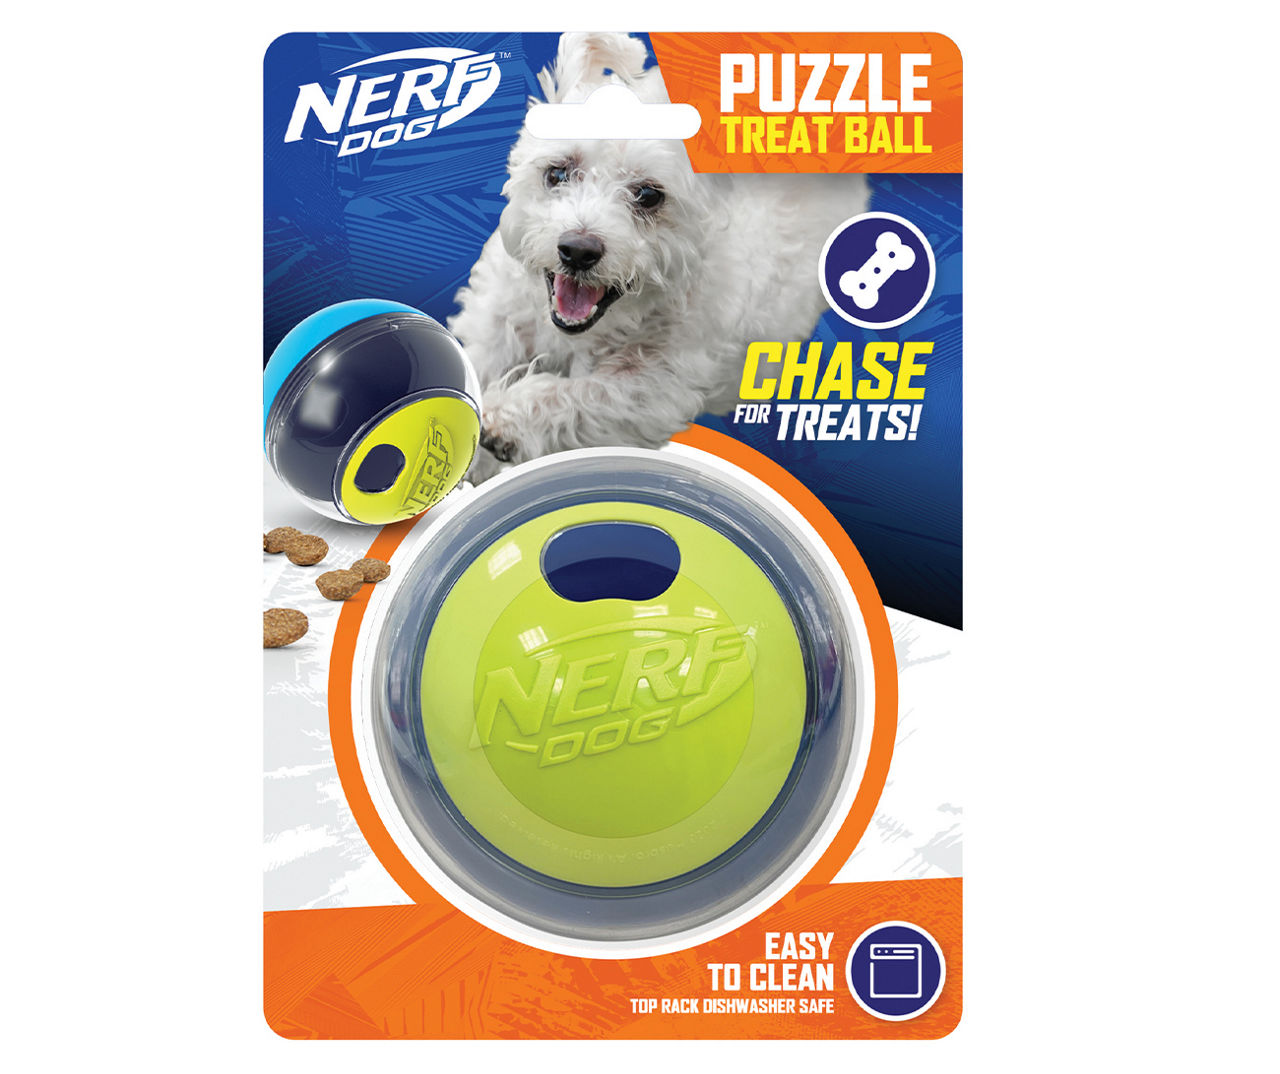 Nerf Dog Puzzle Treat Ball 3.5” Slow Feeder Dog Toy for Small